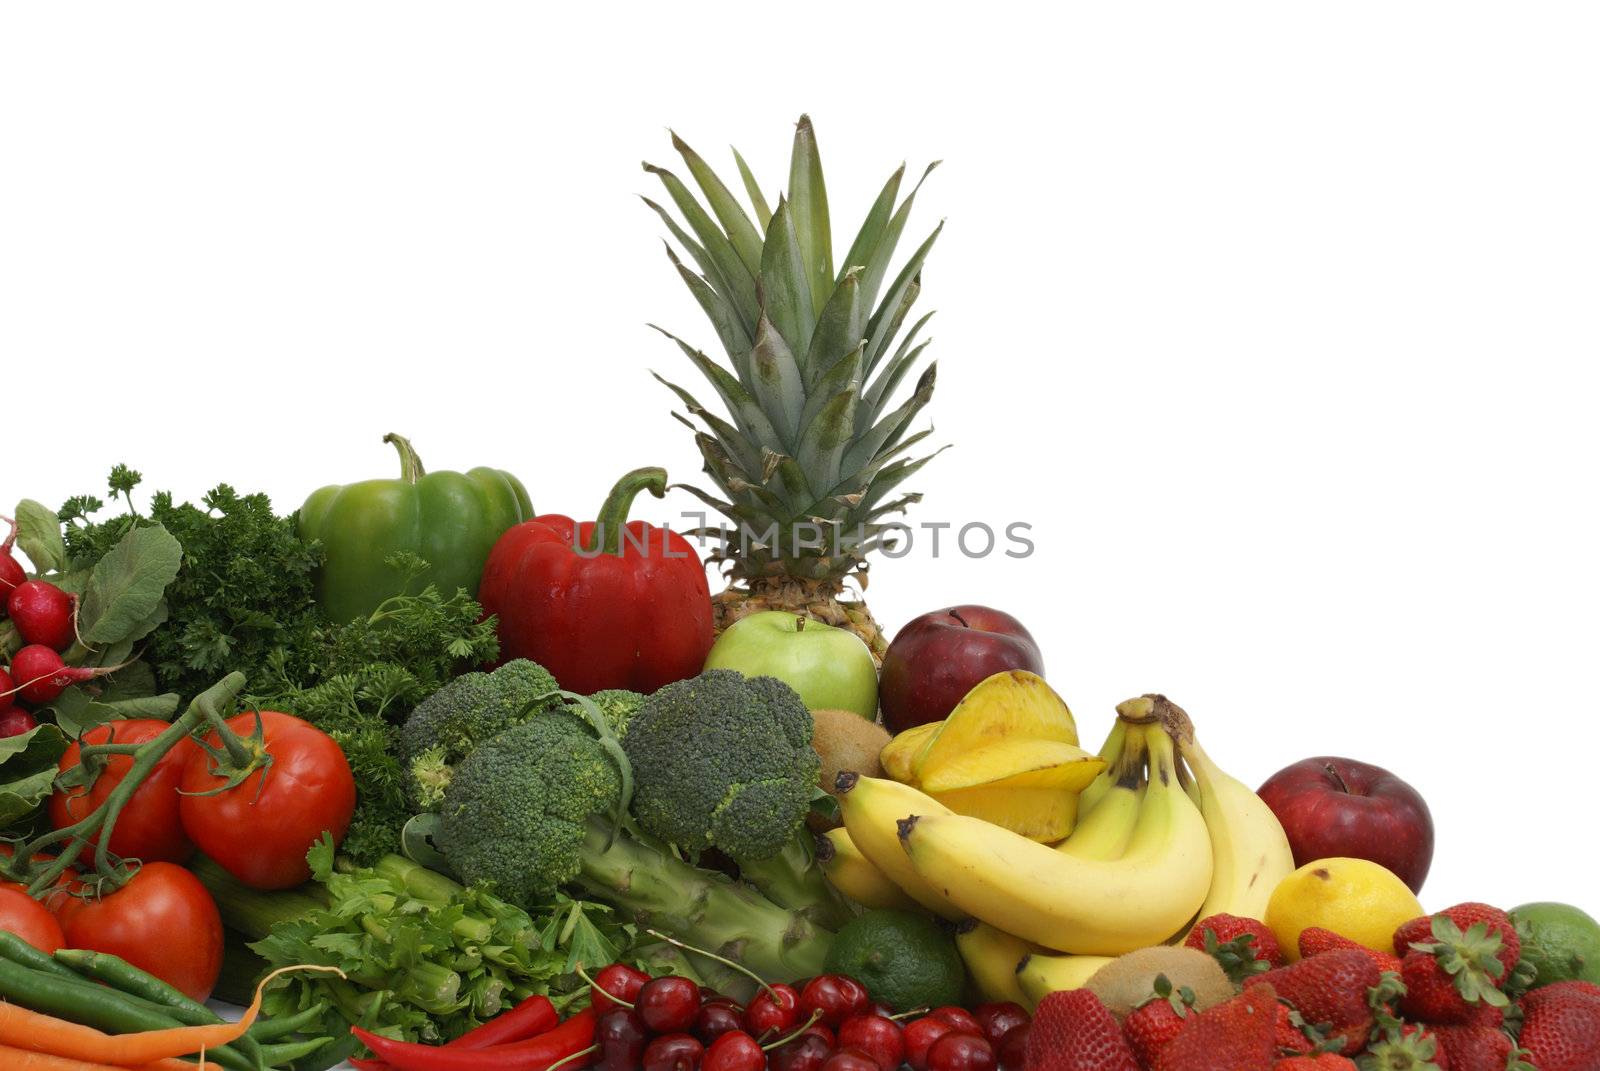 A variety of fruits and vegetables arranged on white background.